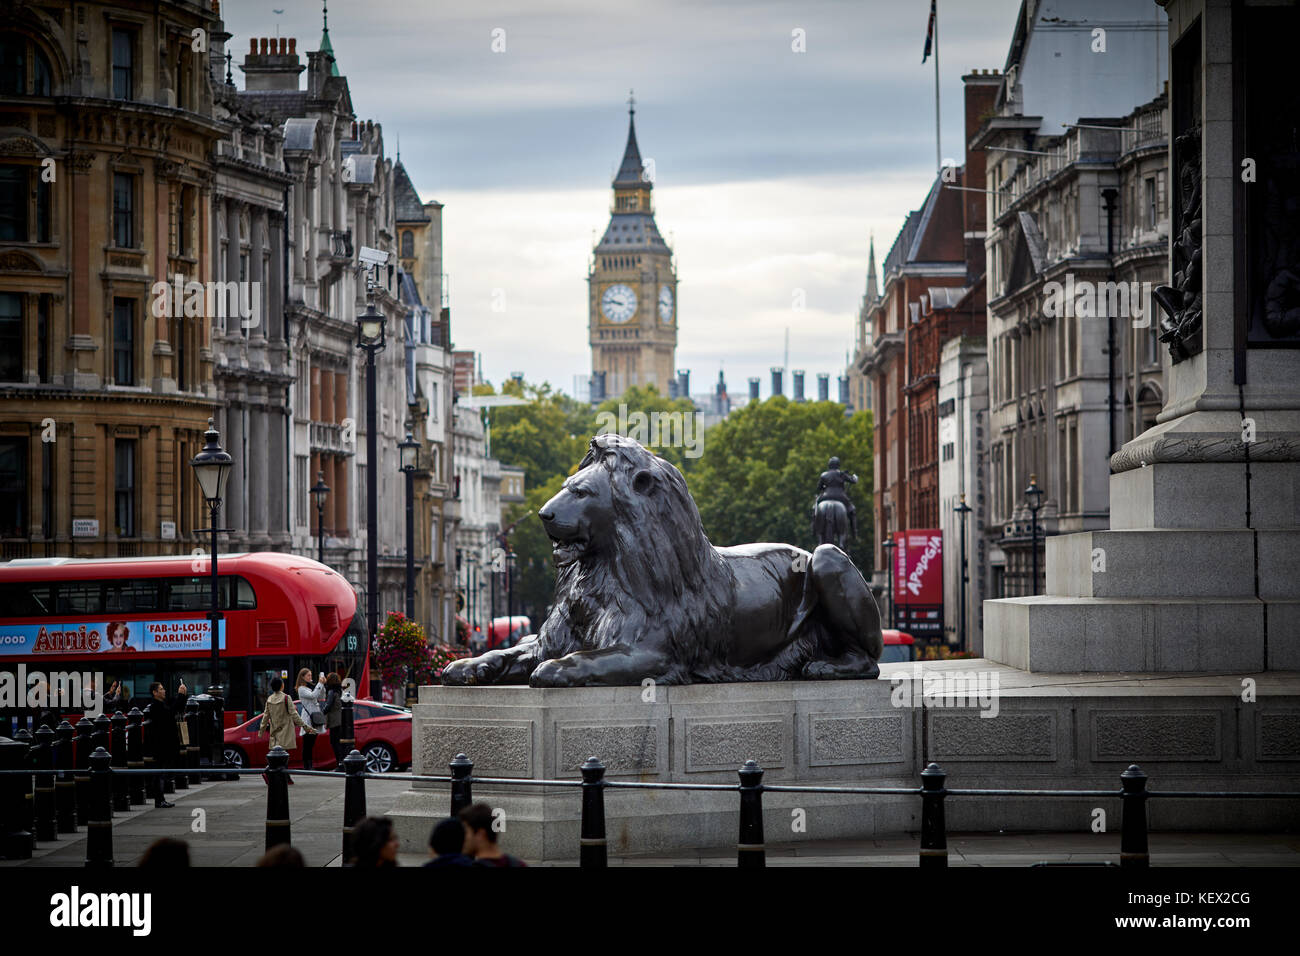 Landmark Trafalgar Square lions City of Westminster framed by Big Ben clocktower in London the capital city of England Stock Photo